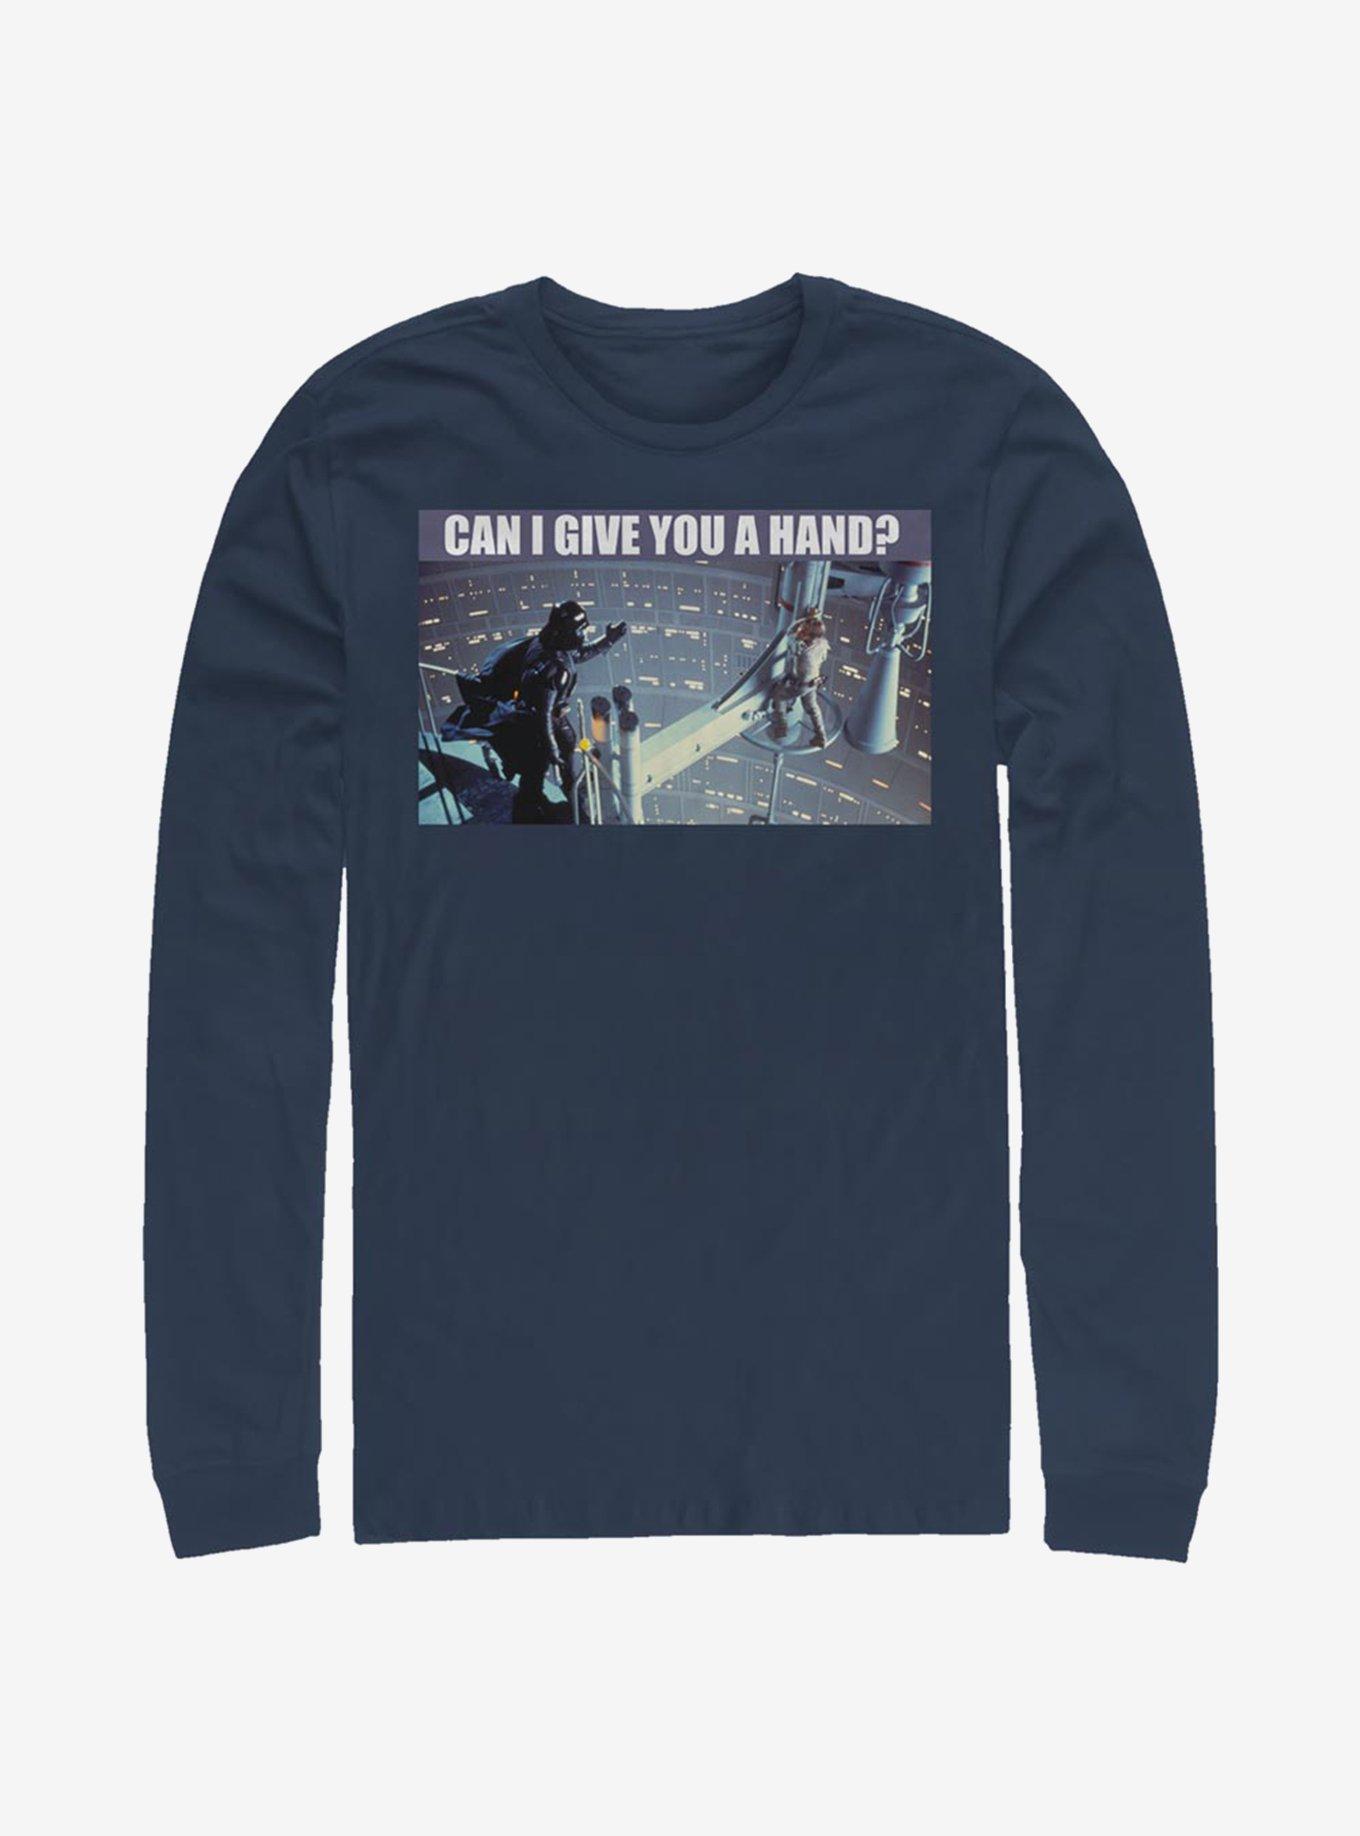 Star Wars Can I Give You A Hand Long-Sleeve T-Shirt, NAVY, hi-res